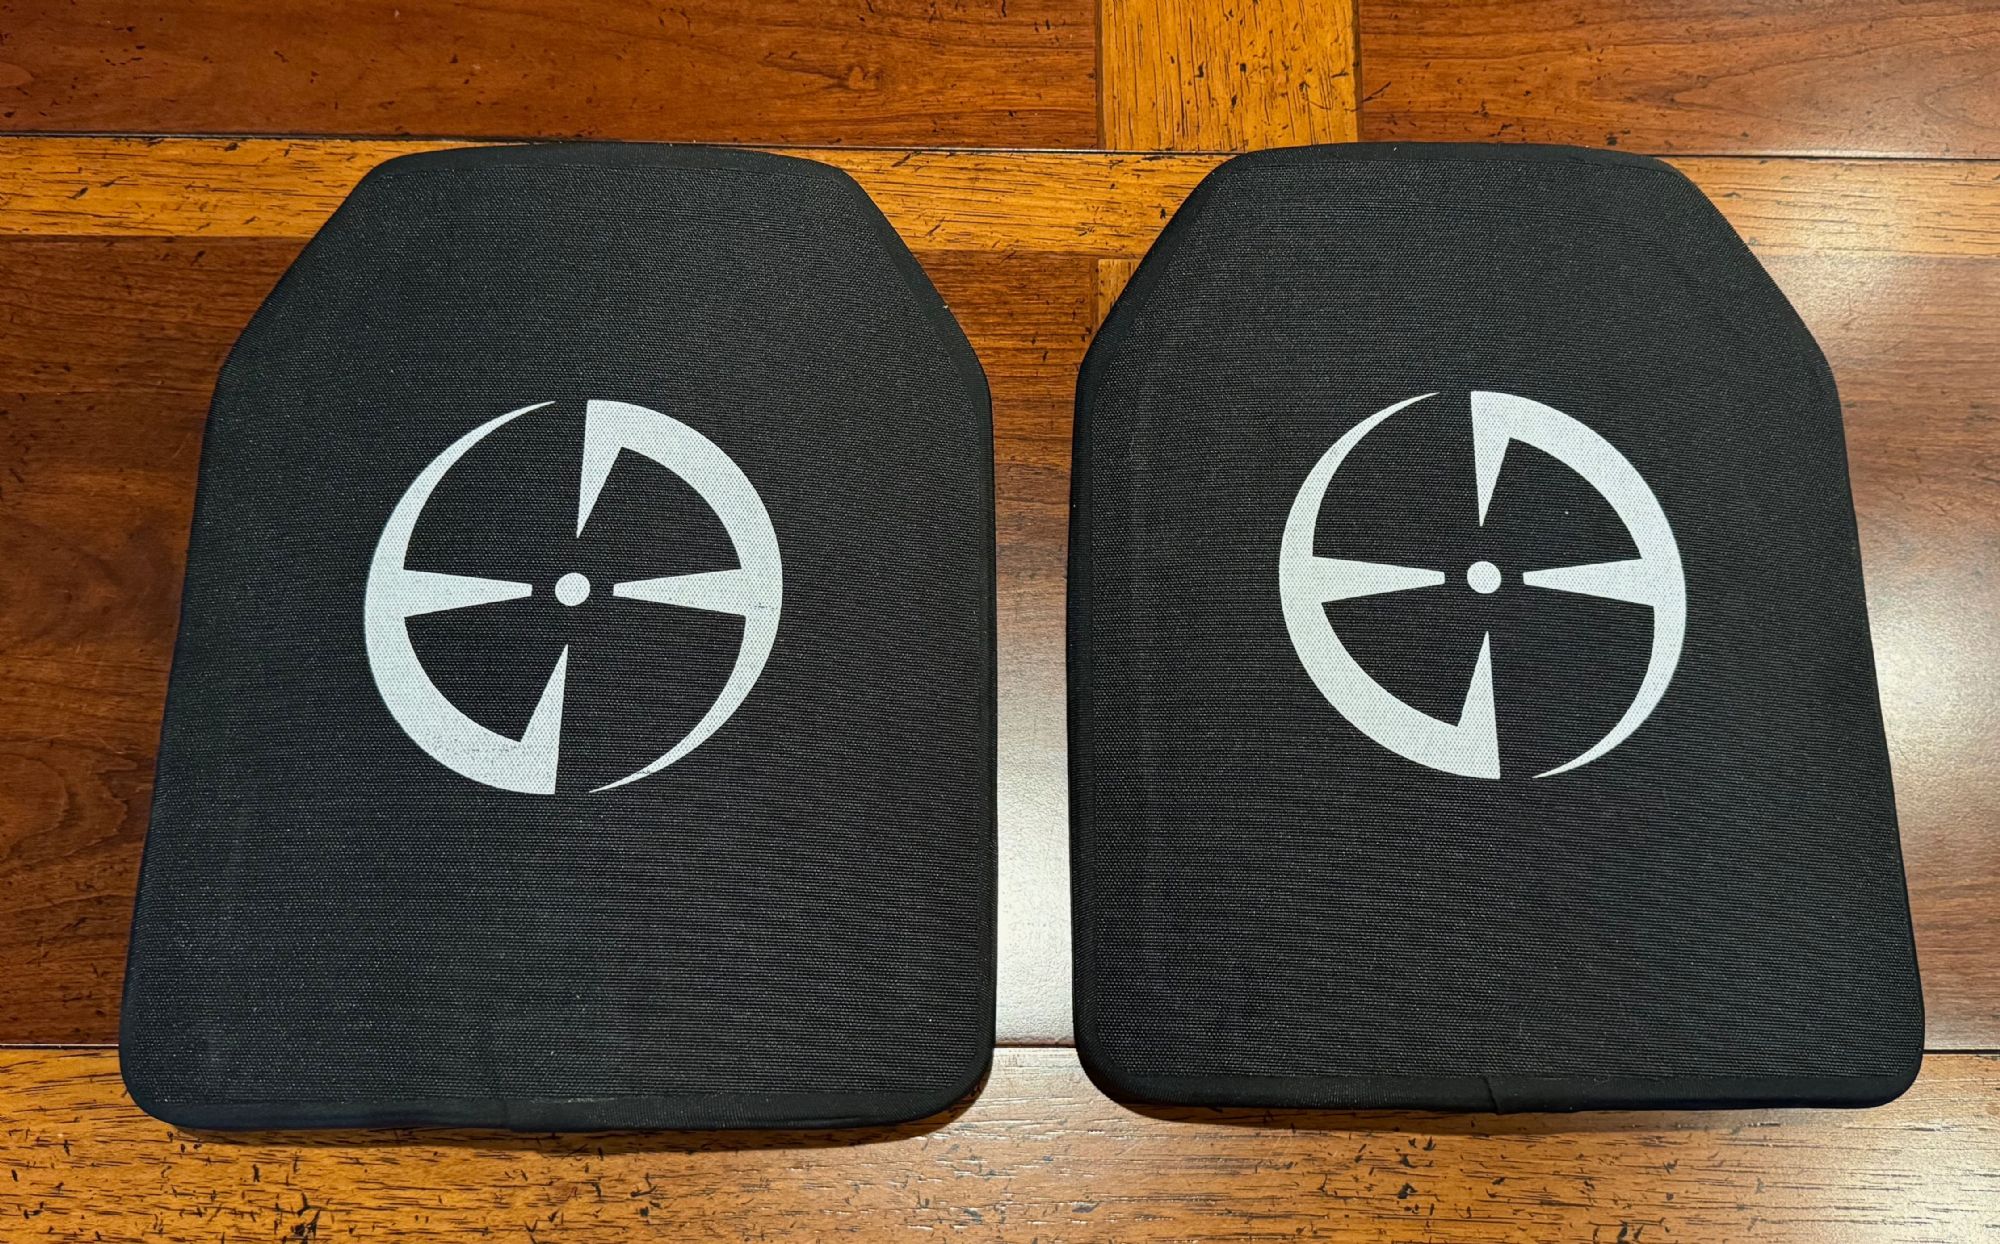 WTS: LA Police Gear Level III Ceramic Ballistic Armor Rifle Plate $160 For The Pair